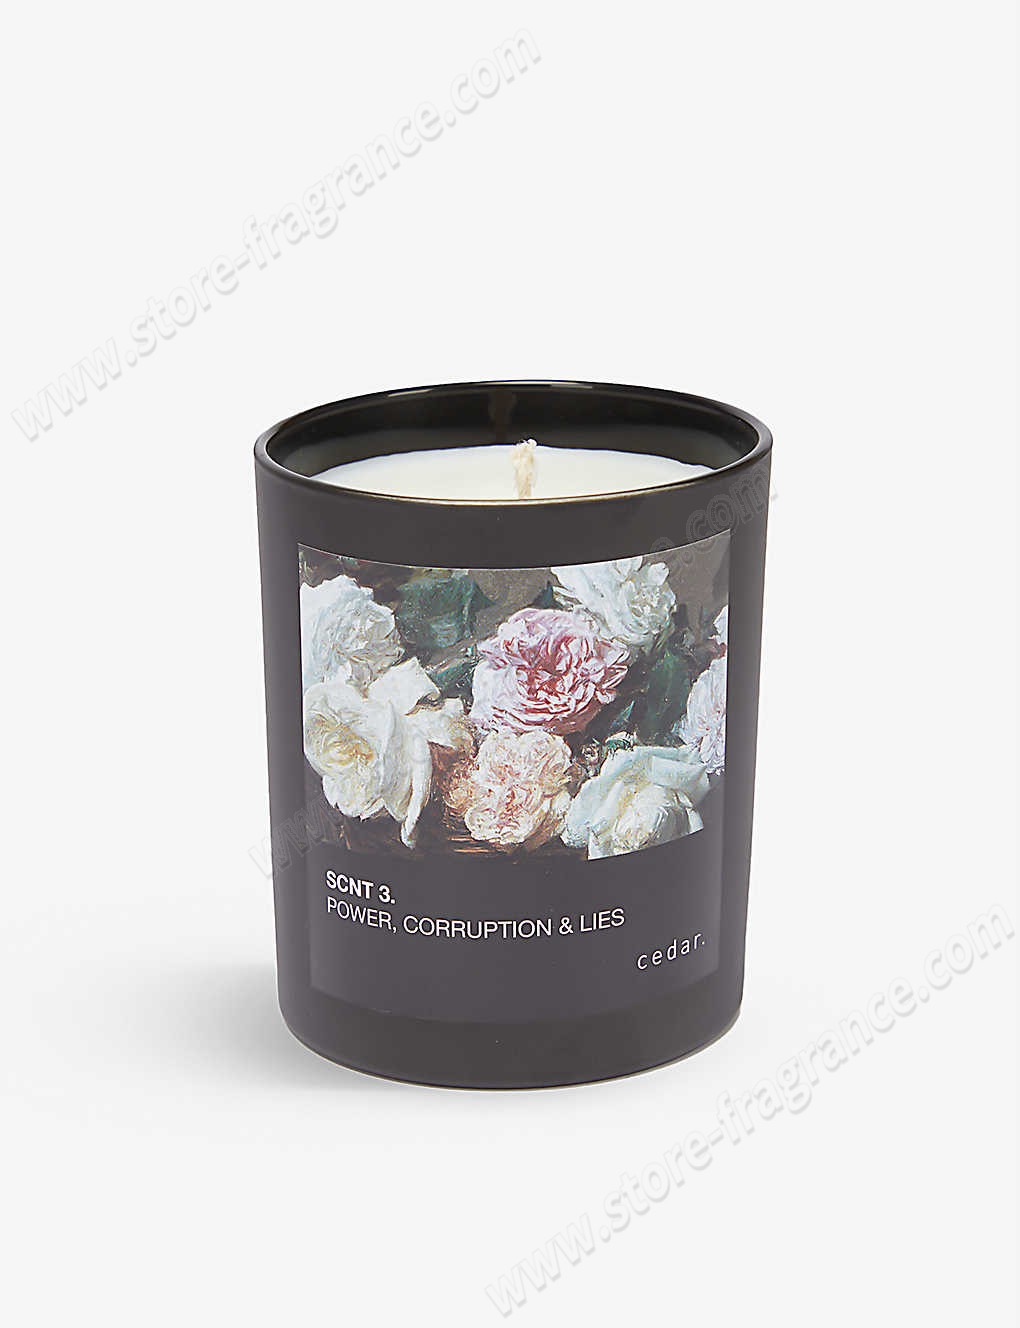 FACTORY RECORDS/Factory Records x Cedar New Order SCNT 2. Power, Corruption & Lies natural-wax candle 240g ✿ Discount Store - FACTORY RECORDS/Factory Records x Cedar New Order SCNT 2. Power, Corruption & Lies natural-wax candle 240g ✿ Discount Store